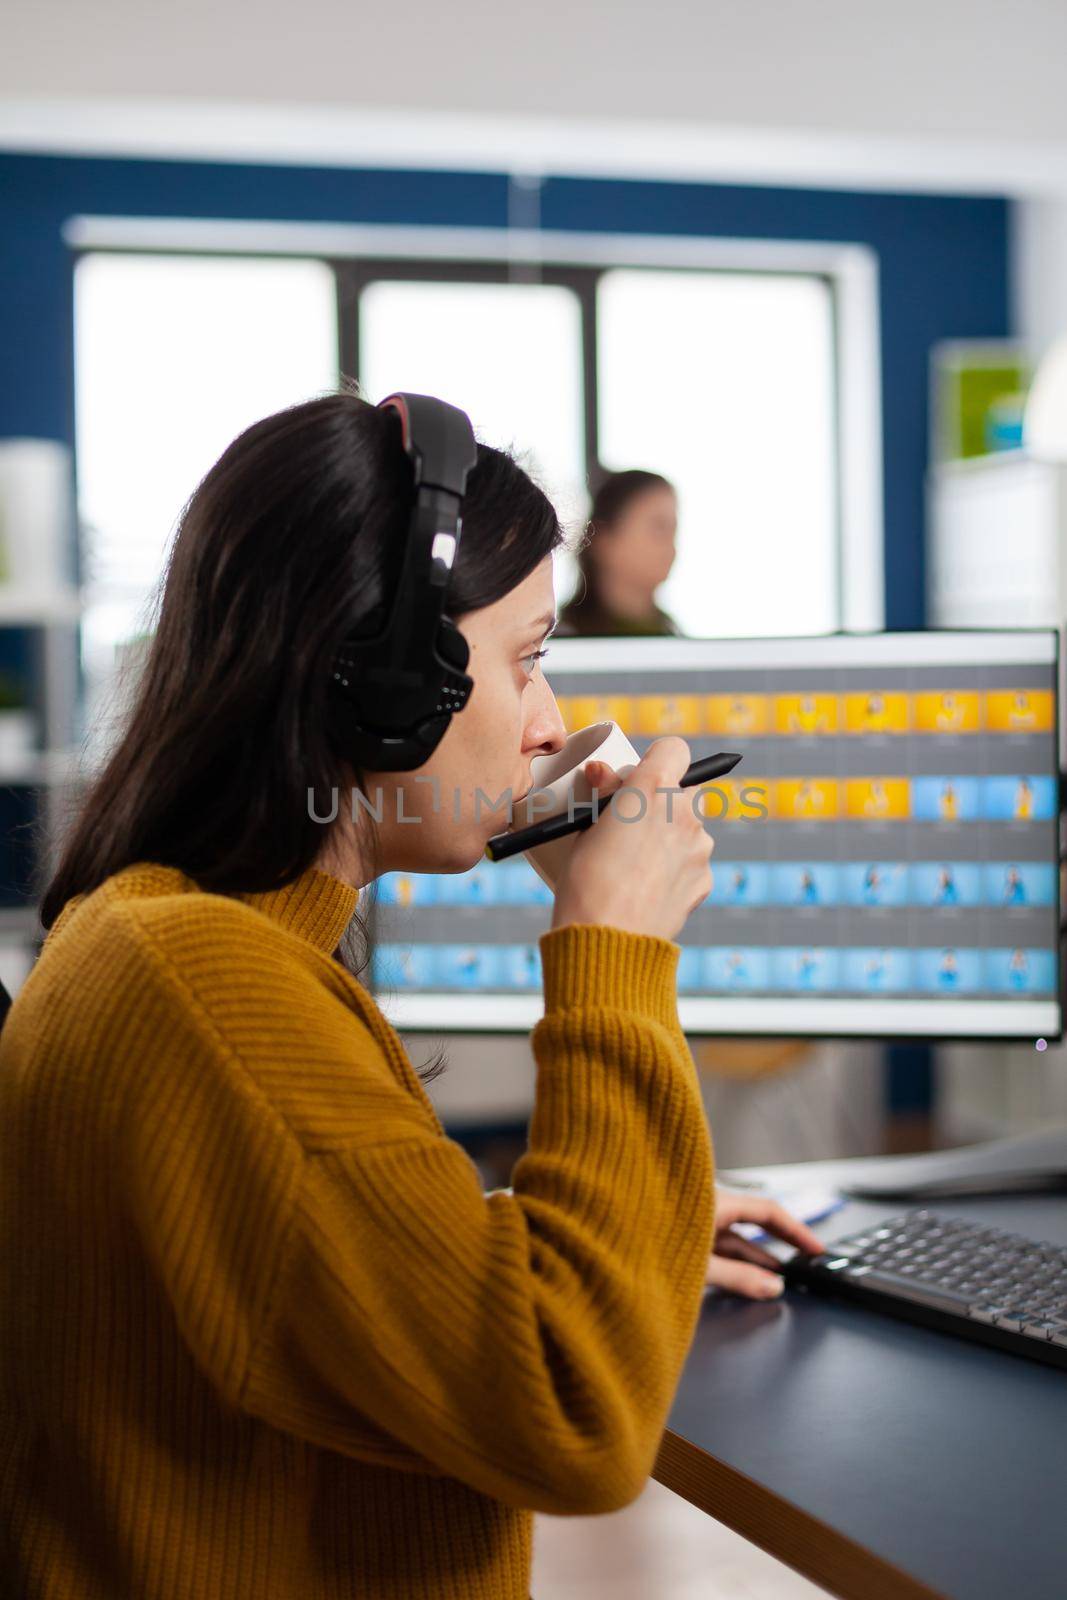 Photo editor with headphones retouching image using stylus pen, drinking coffee, working on PC with two displays. Woman retoucher editing in software app with graphic tablet sitting in creative agency